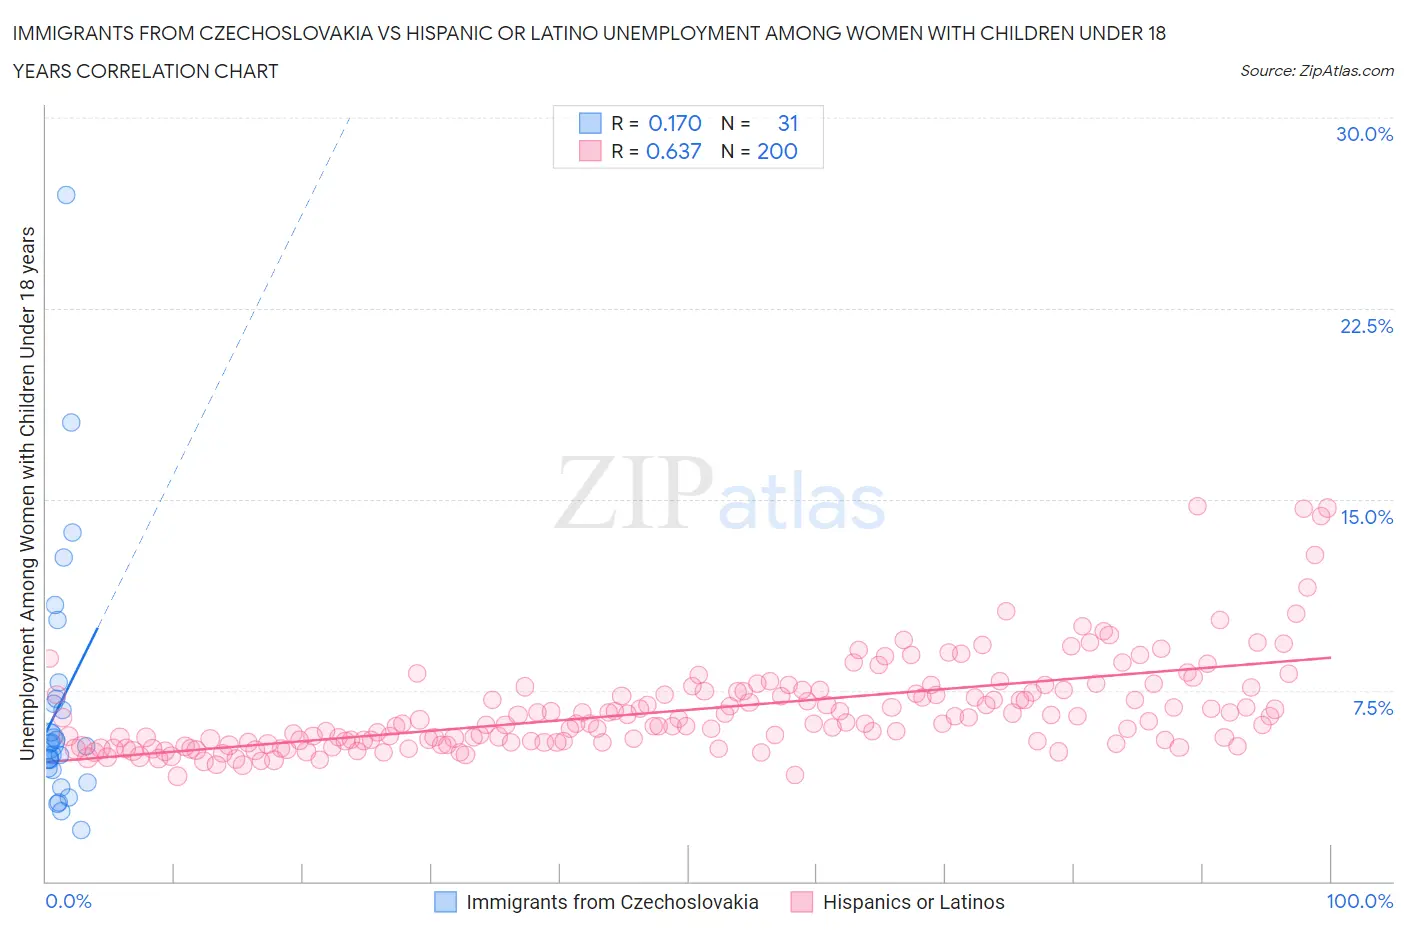 Immigrants from Czechoslovakia vs Hispanic or Latino Unemployment Among Women with Children Under 18 years